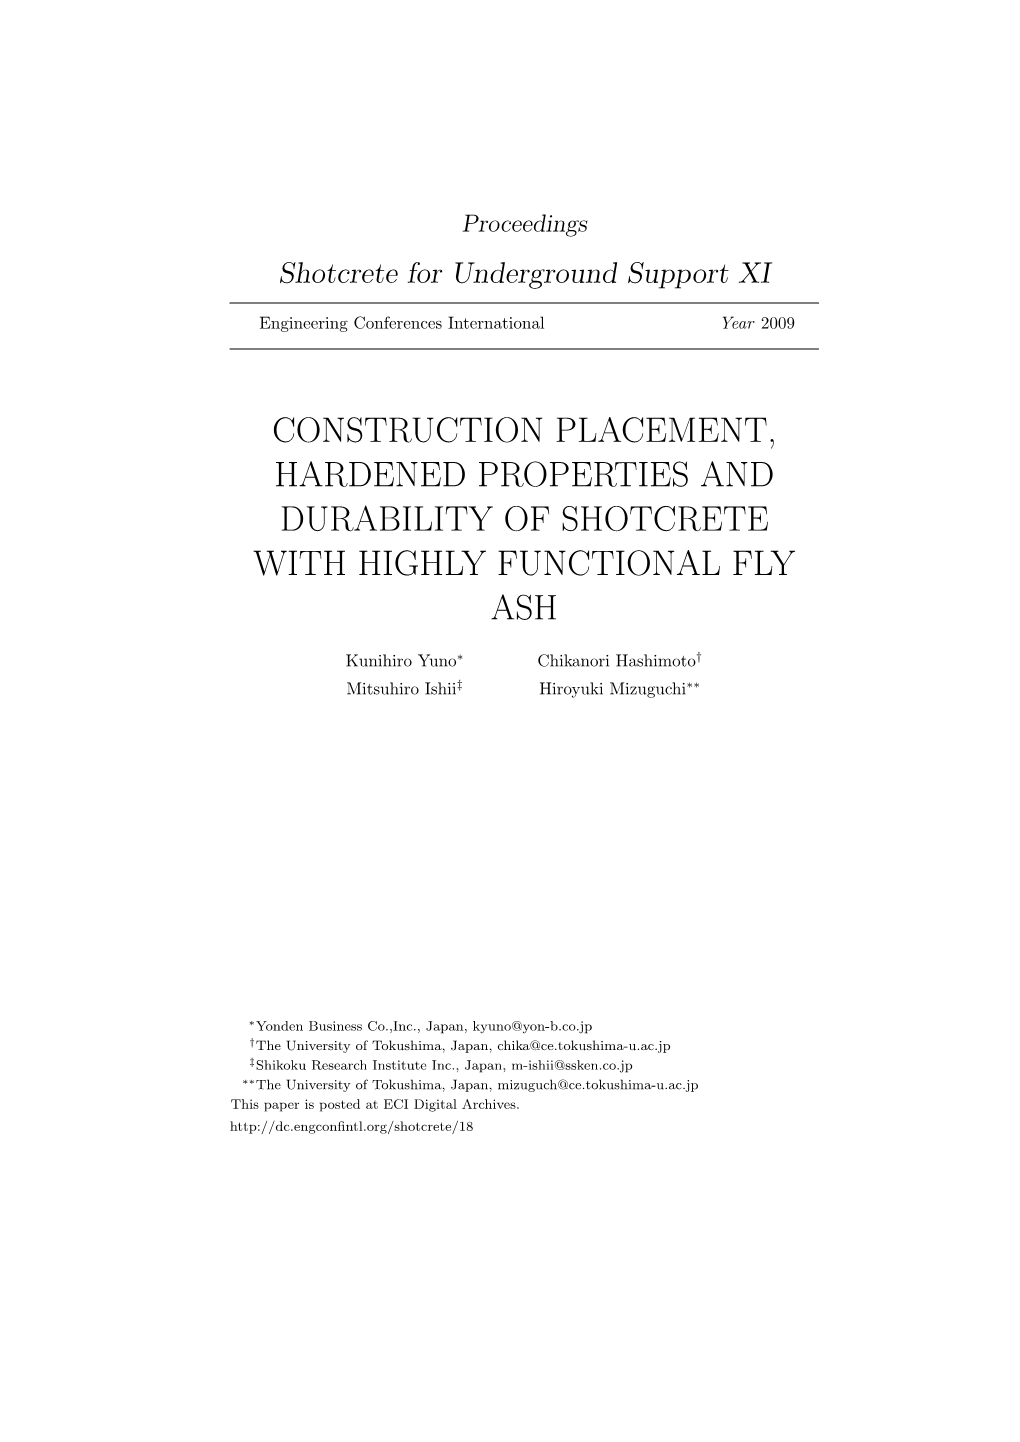 Construction Placement, Hardened Properties and Durability of Shotcrete with Highly Functional Fly Ash